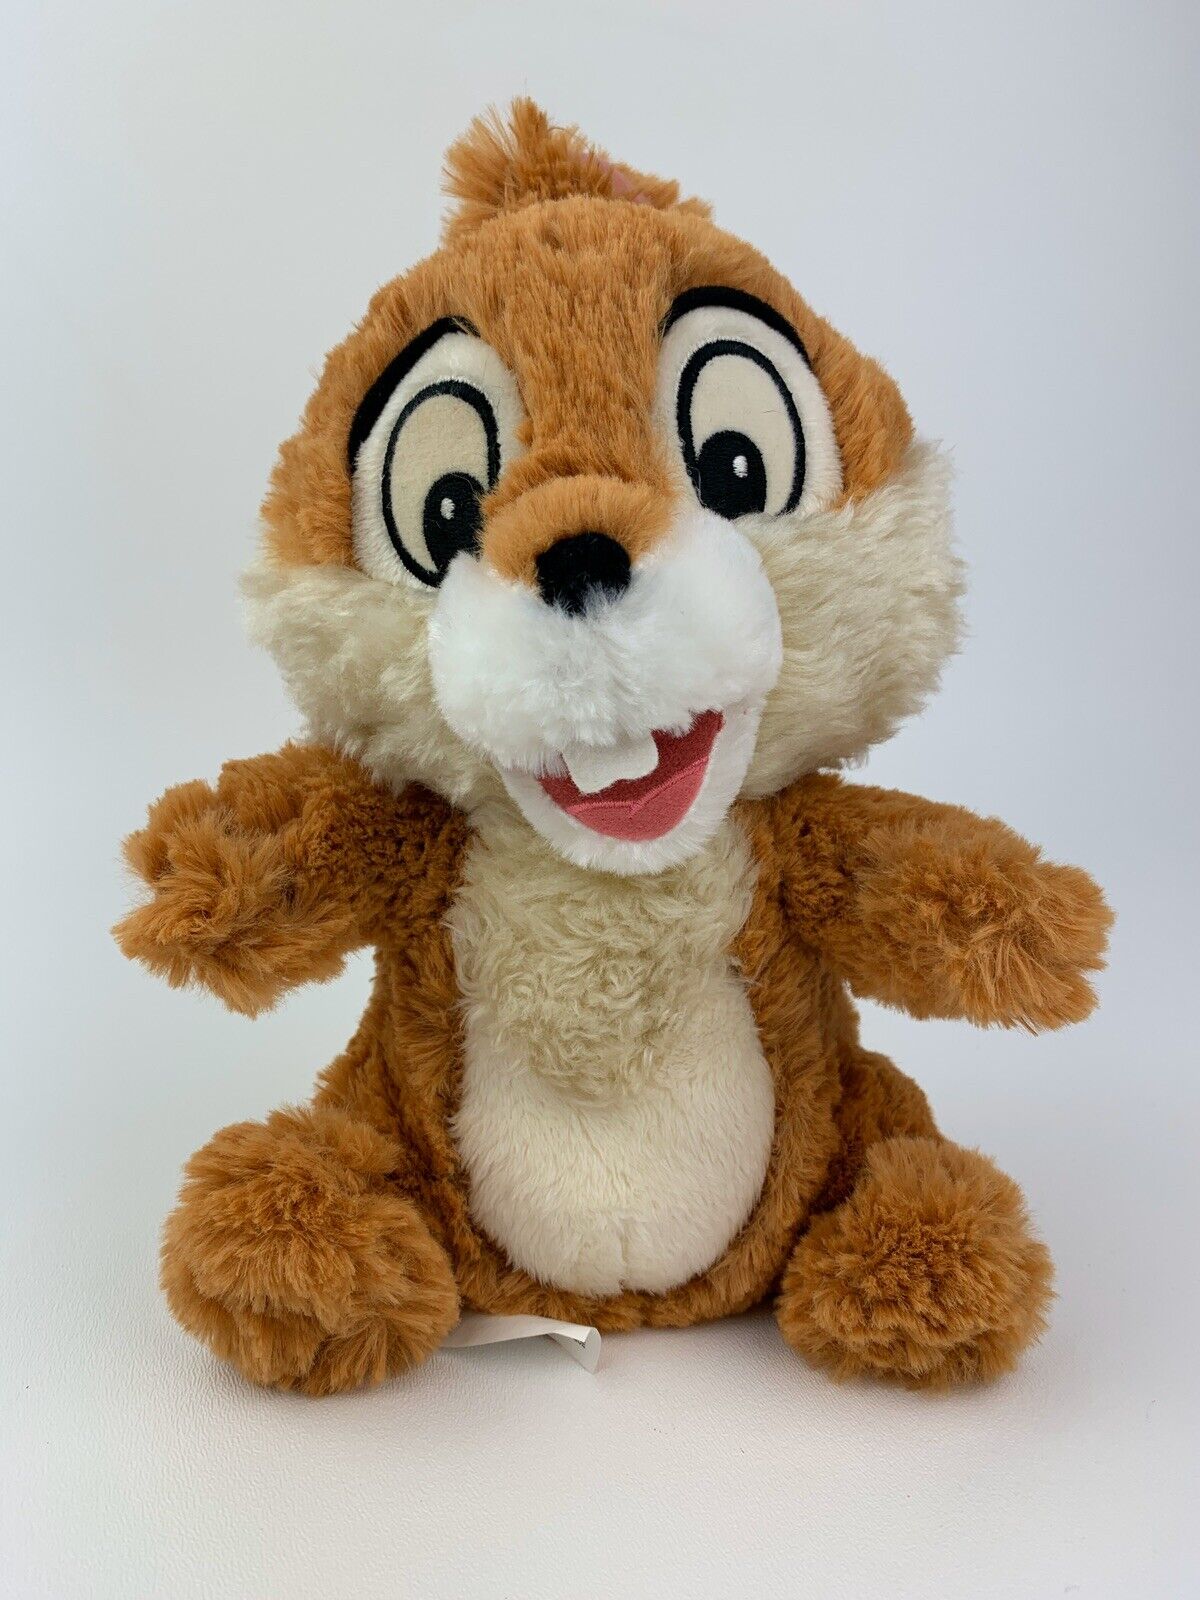 Official Disney Store Chip Chipmunk Plush Soft Stuffed Toy 11” Tall Chip & Dale